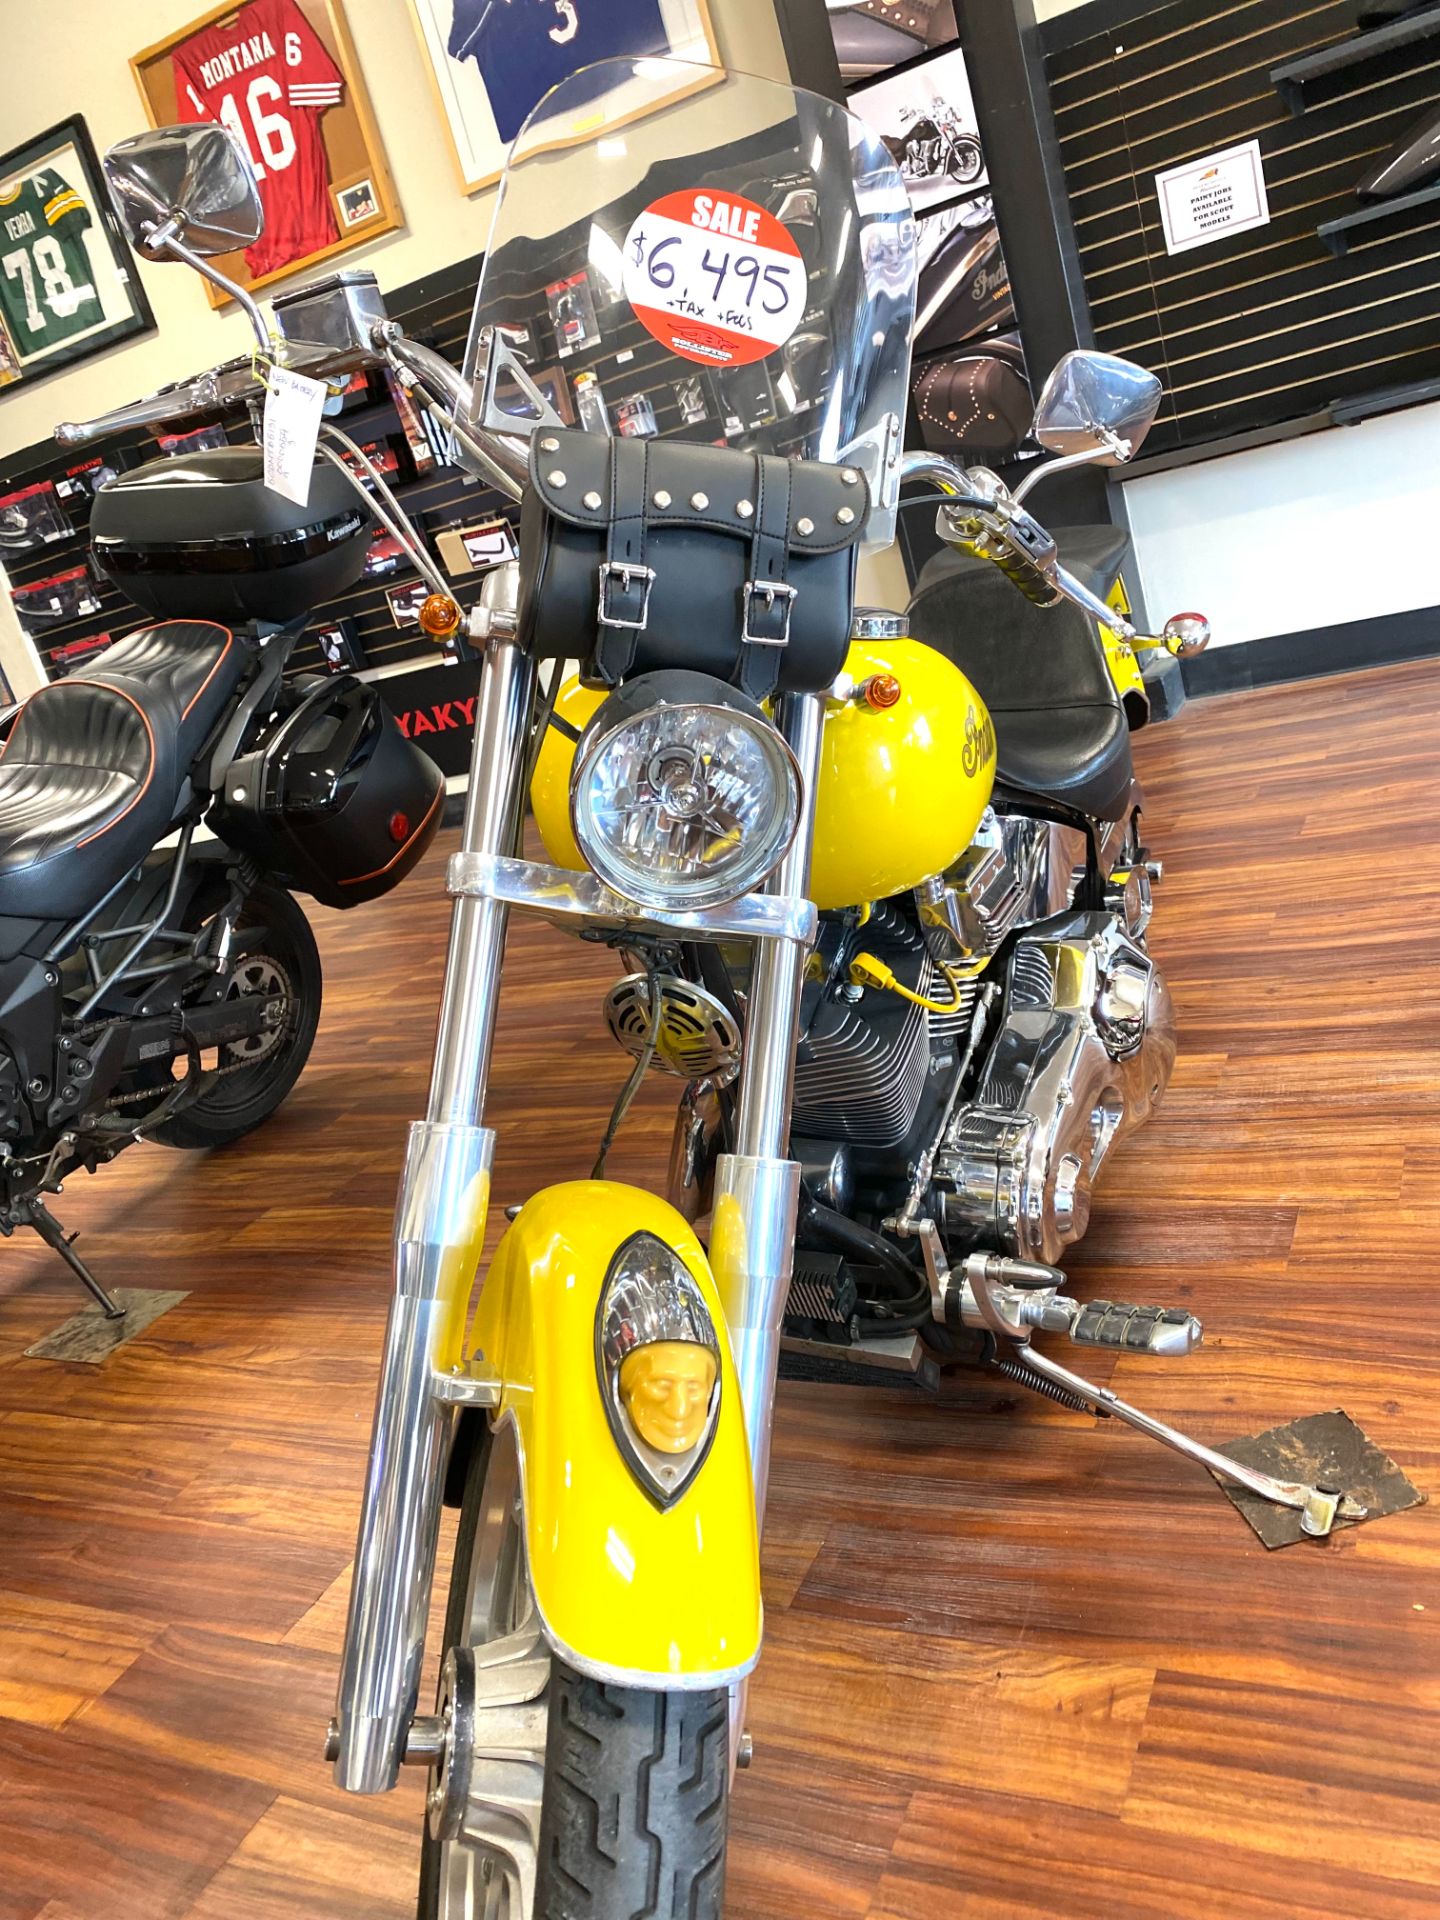 Used 2001 Indian Scout Motorcycles in Hollister, CA